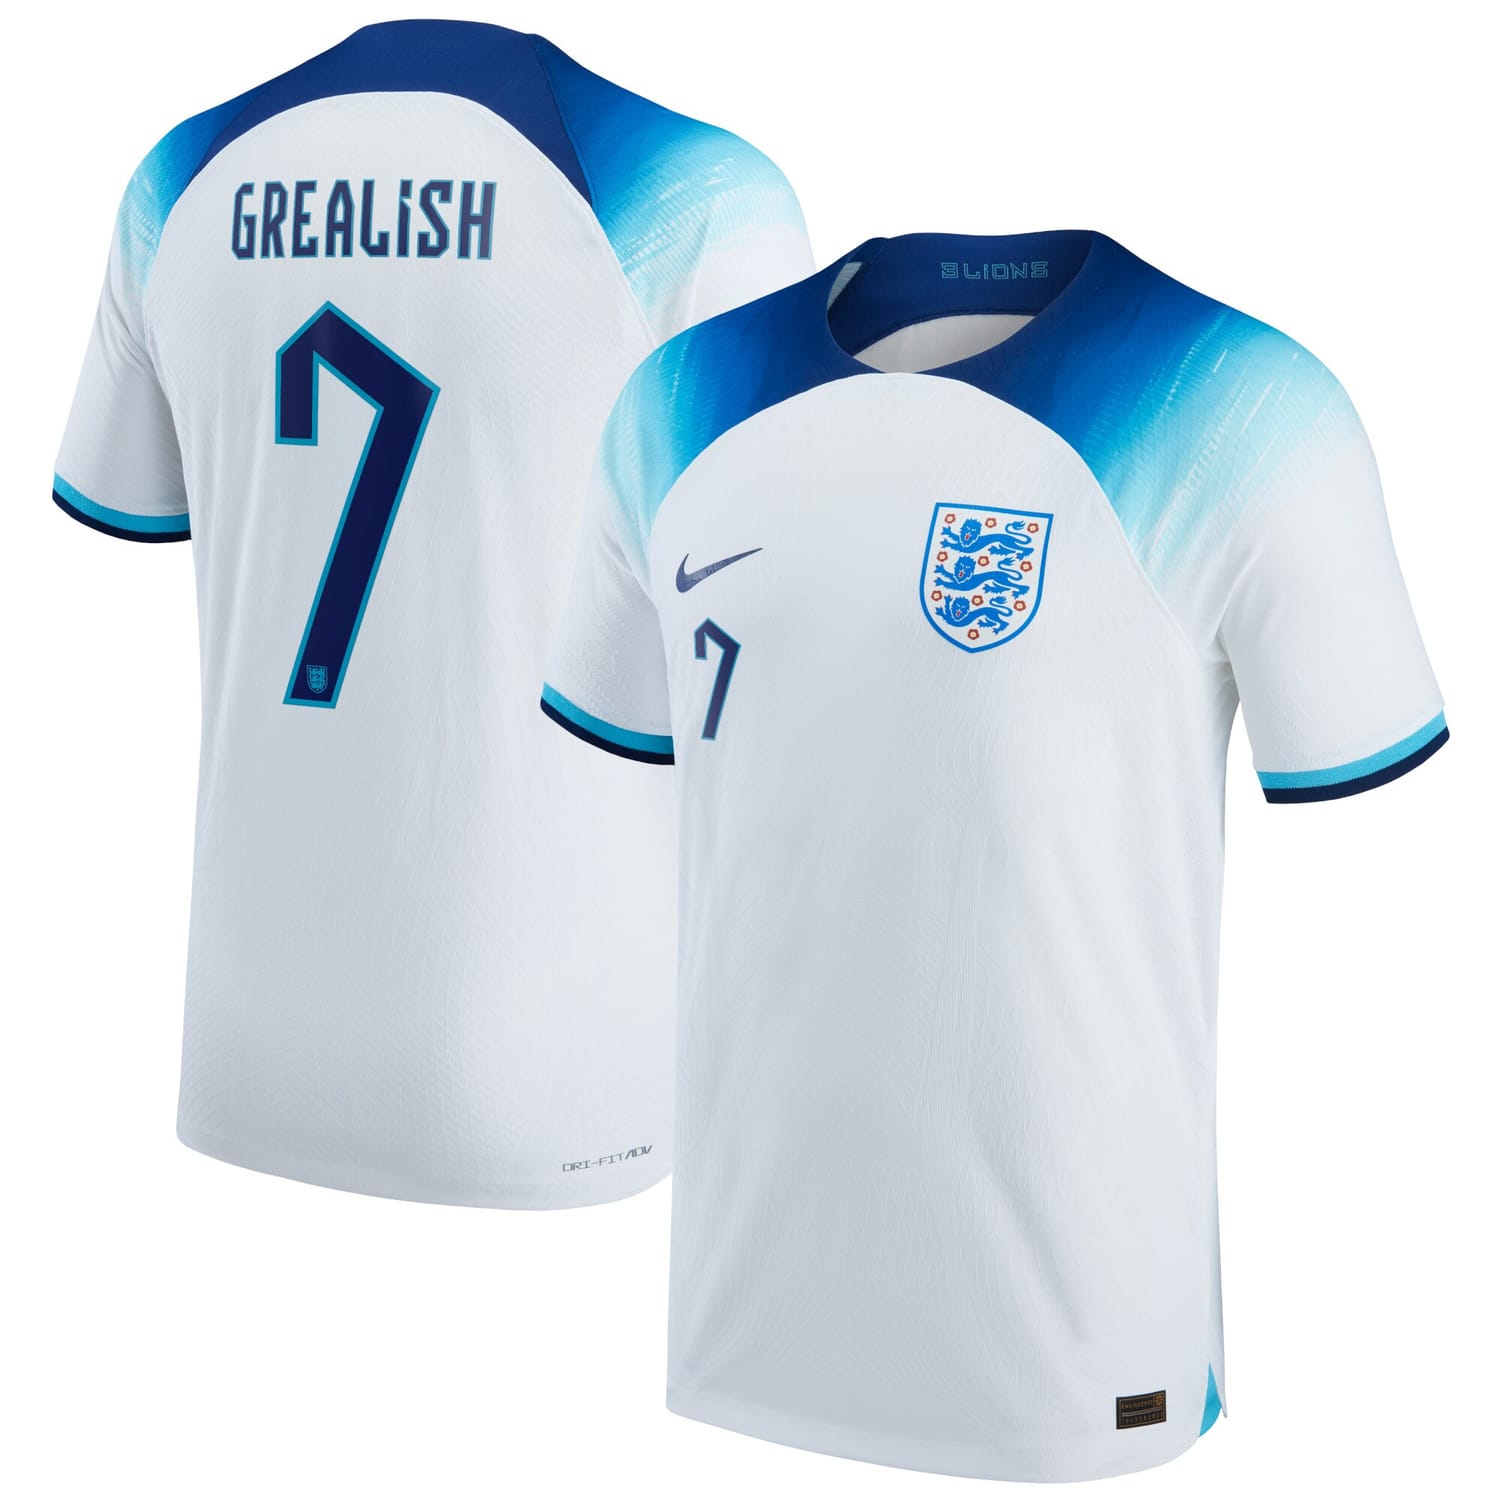 England National Team Home Authentic Jersey Shirt 2022 player Jack Grealish 7 printing for Men